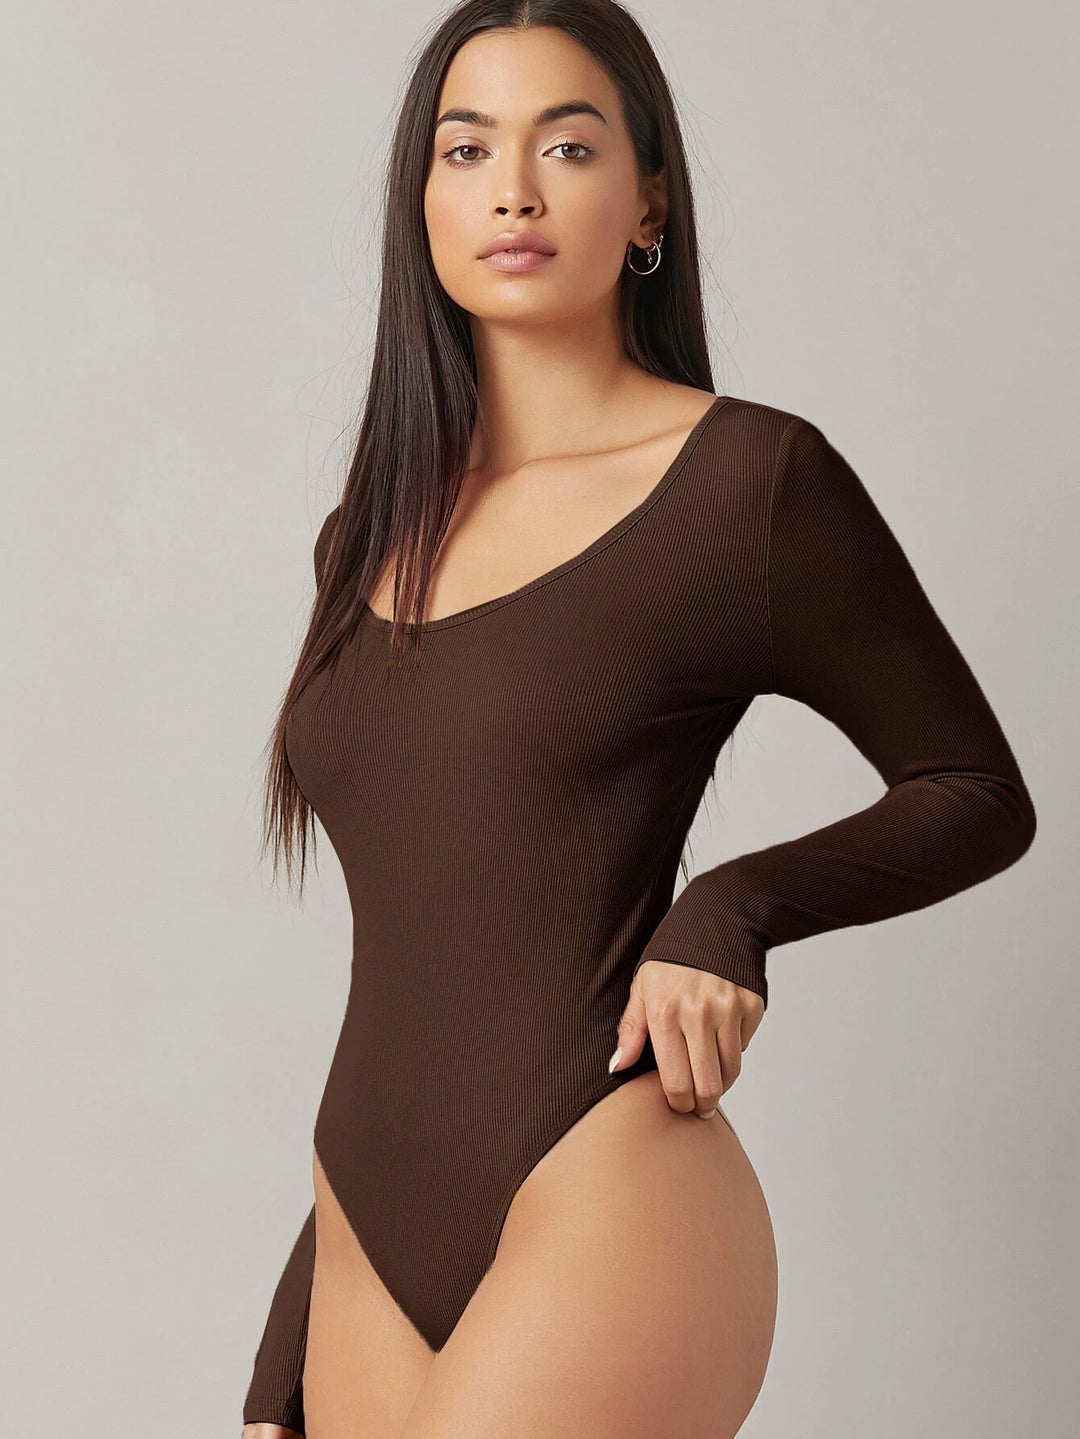 Form Fitted Solid Colored Bodysuit